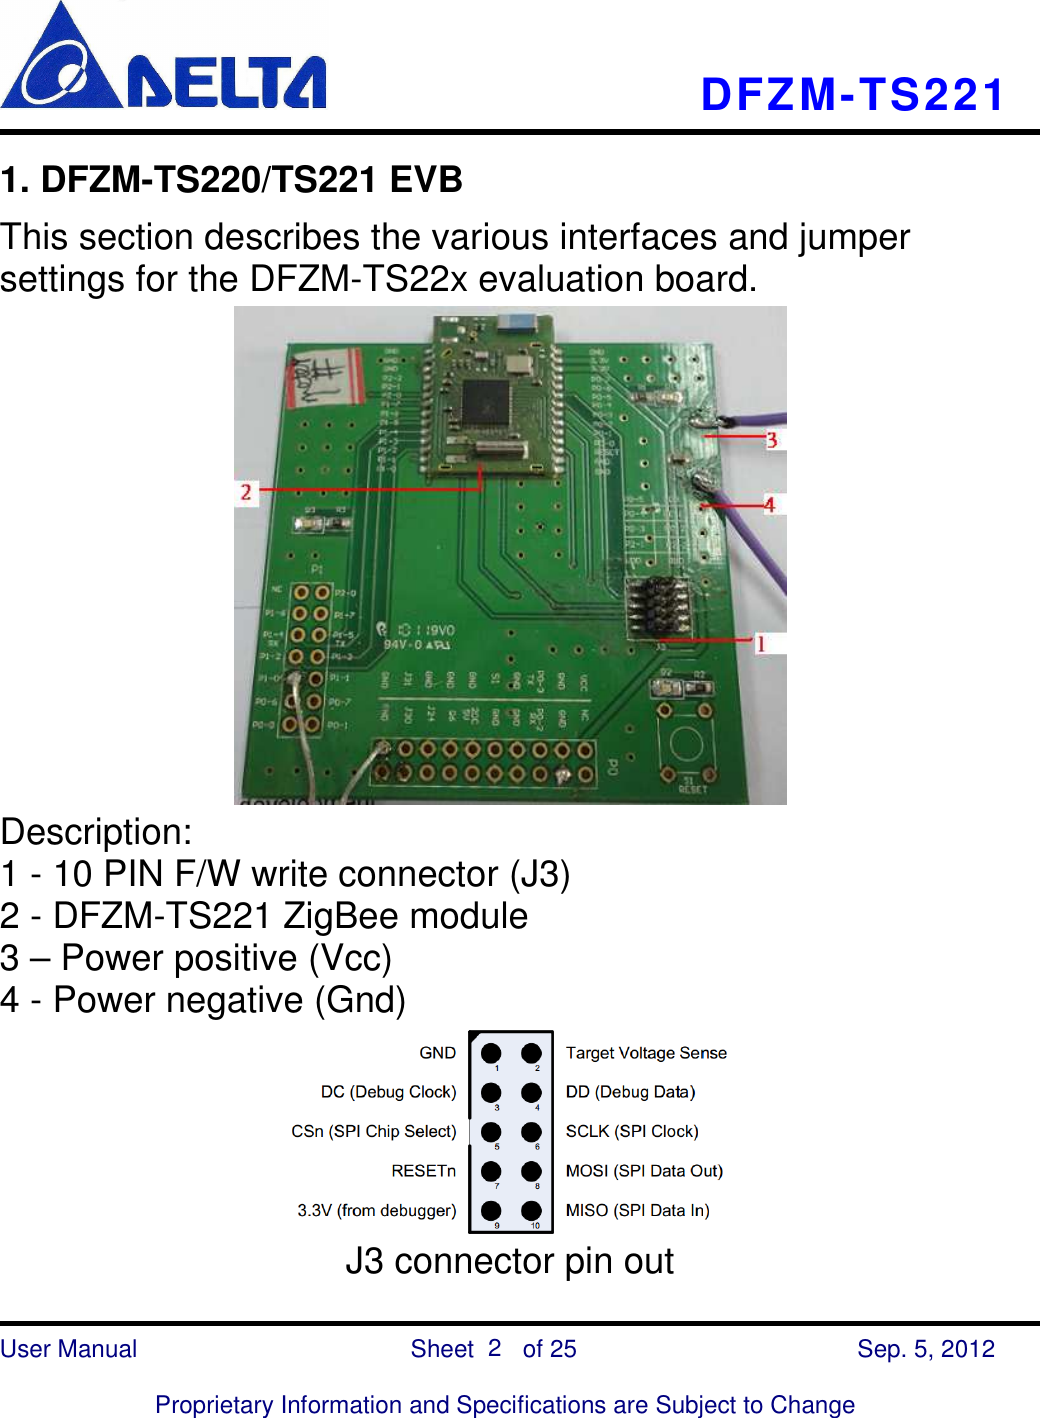    DFZM-TS221    User Manual                            Sheet        of 25      Sep. 5, 2012  Proprietary Information and Specifications are Subject to Change 2 1. DFZM-TS220/TS221 EVB This section describes the various interfaces and jumper settings for the DFZM-TS22x evaluation board.  Description: 1 - 10 PIN F/W write connector (J3)   2 - DFZM-TS221 ZigBee module 3 – Power positive (Vcc)   4 - Power negative (Gnd)  J3 connector pin out 